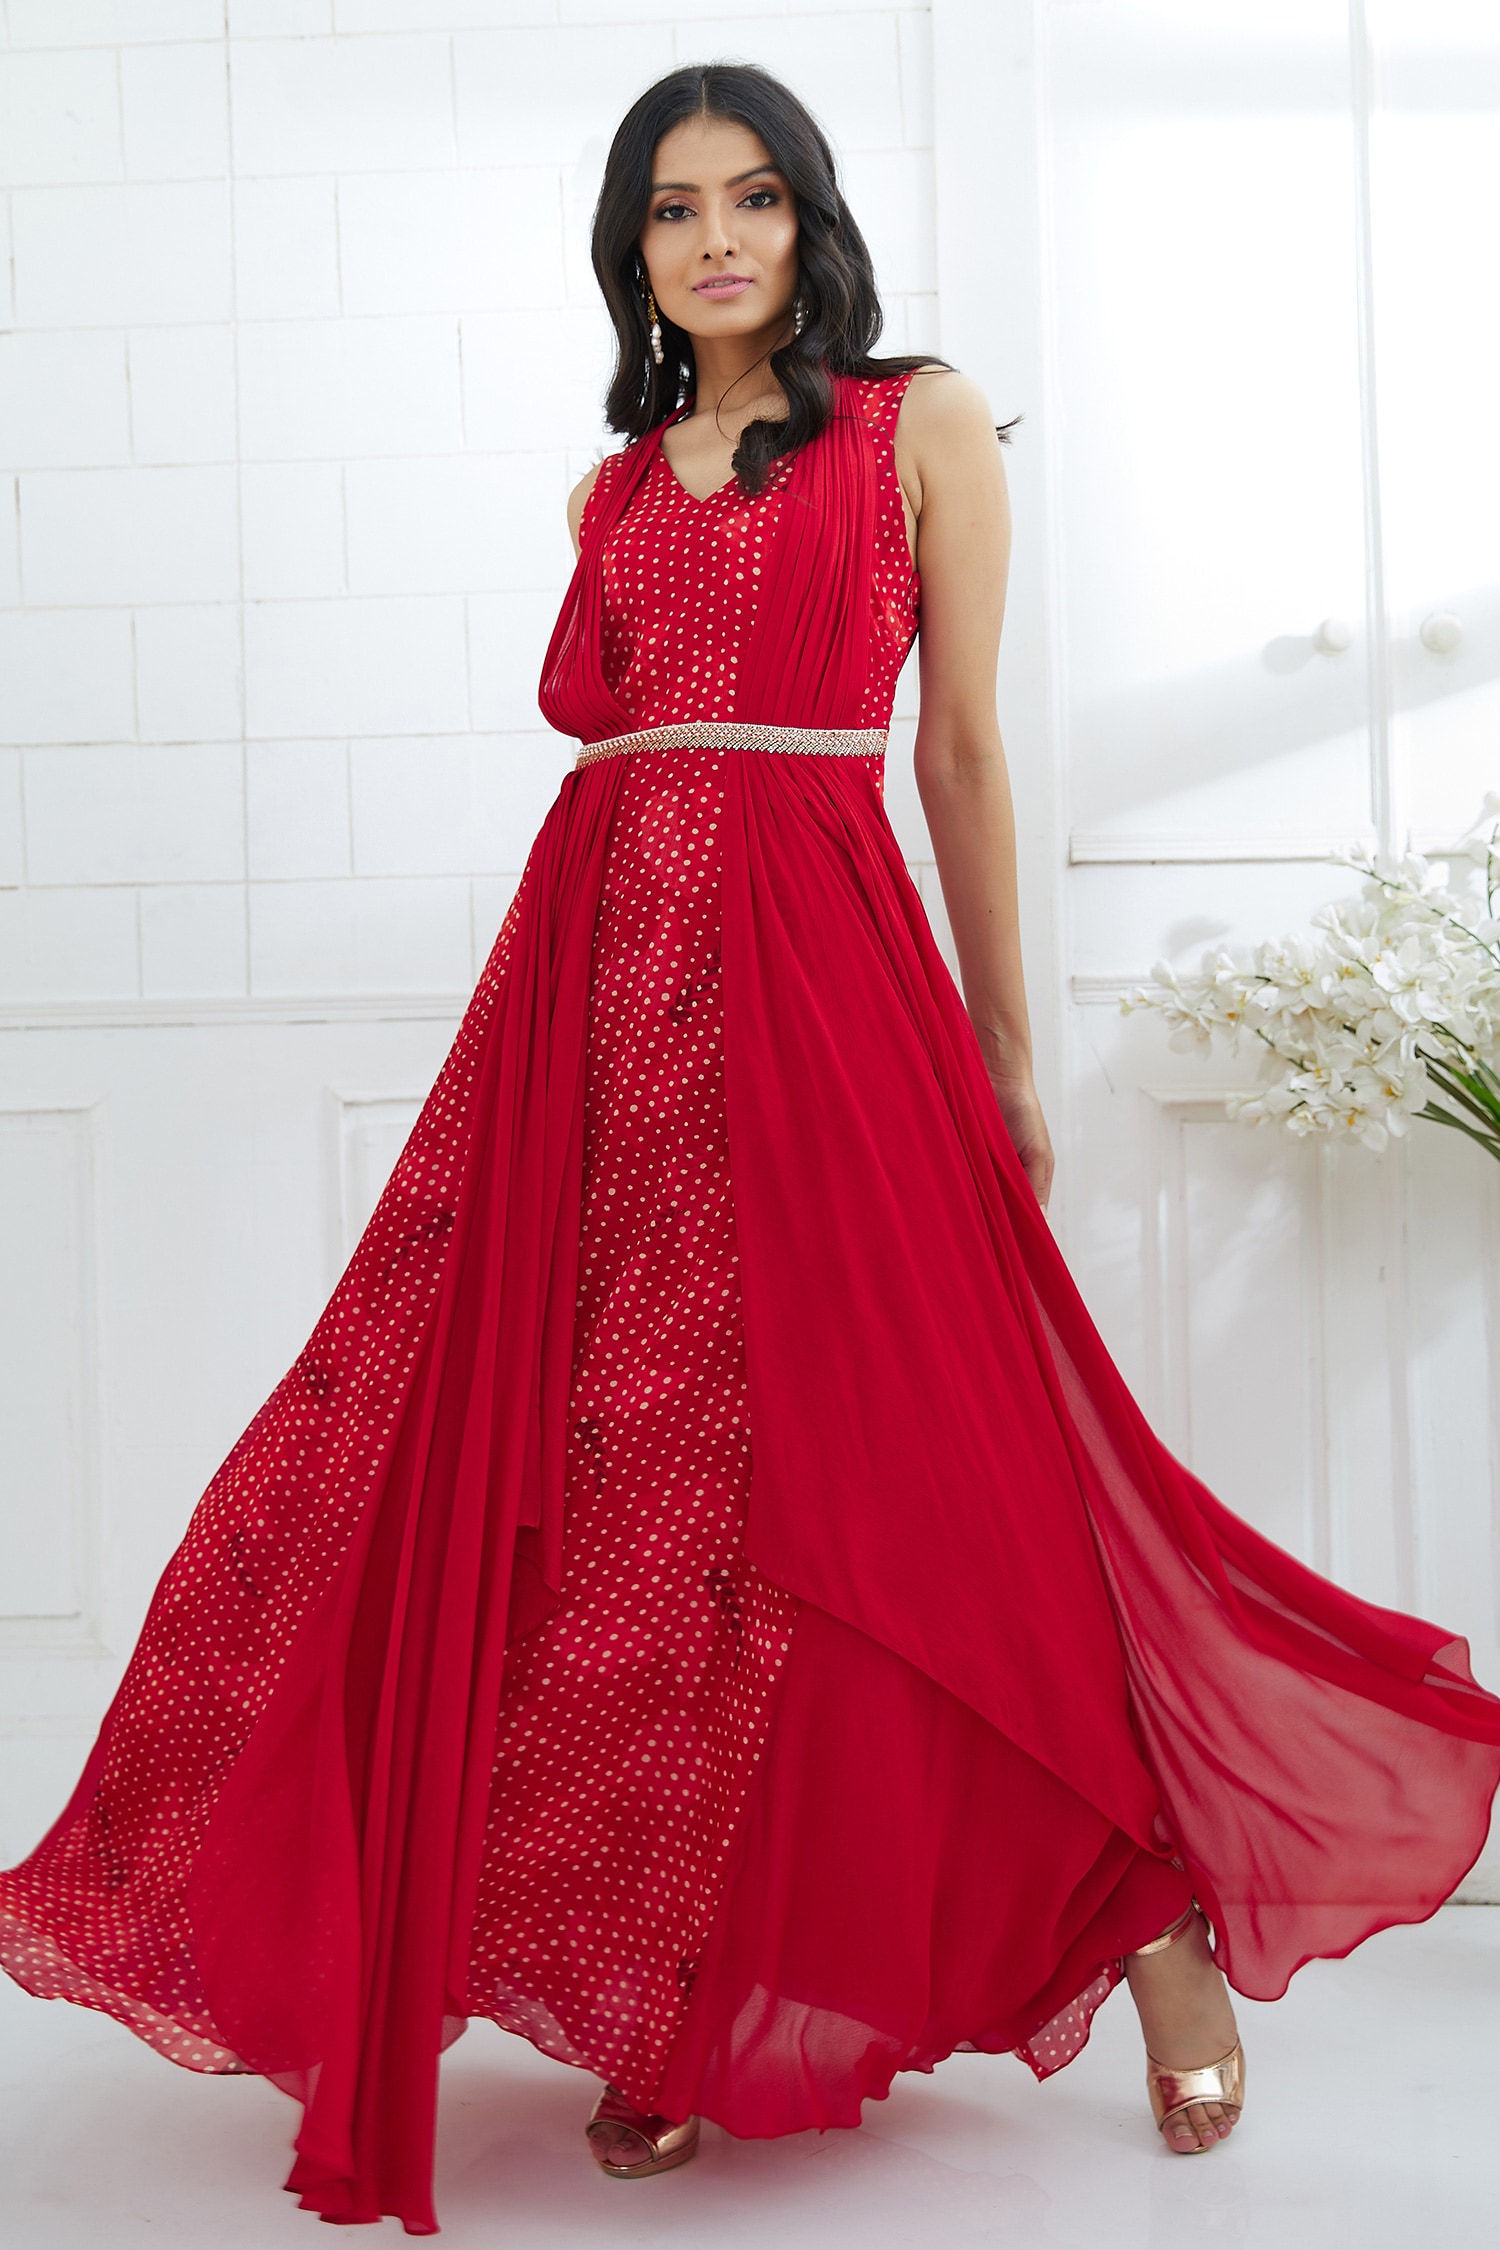 Red gown | Gowns, Red gowns, Cocktail gowns